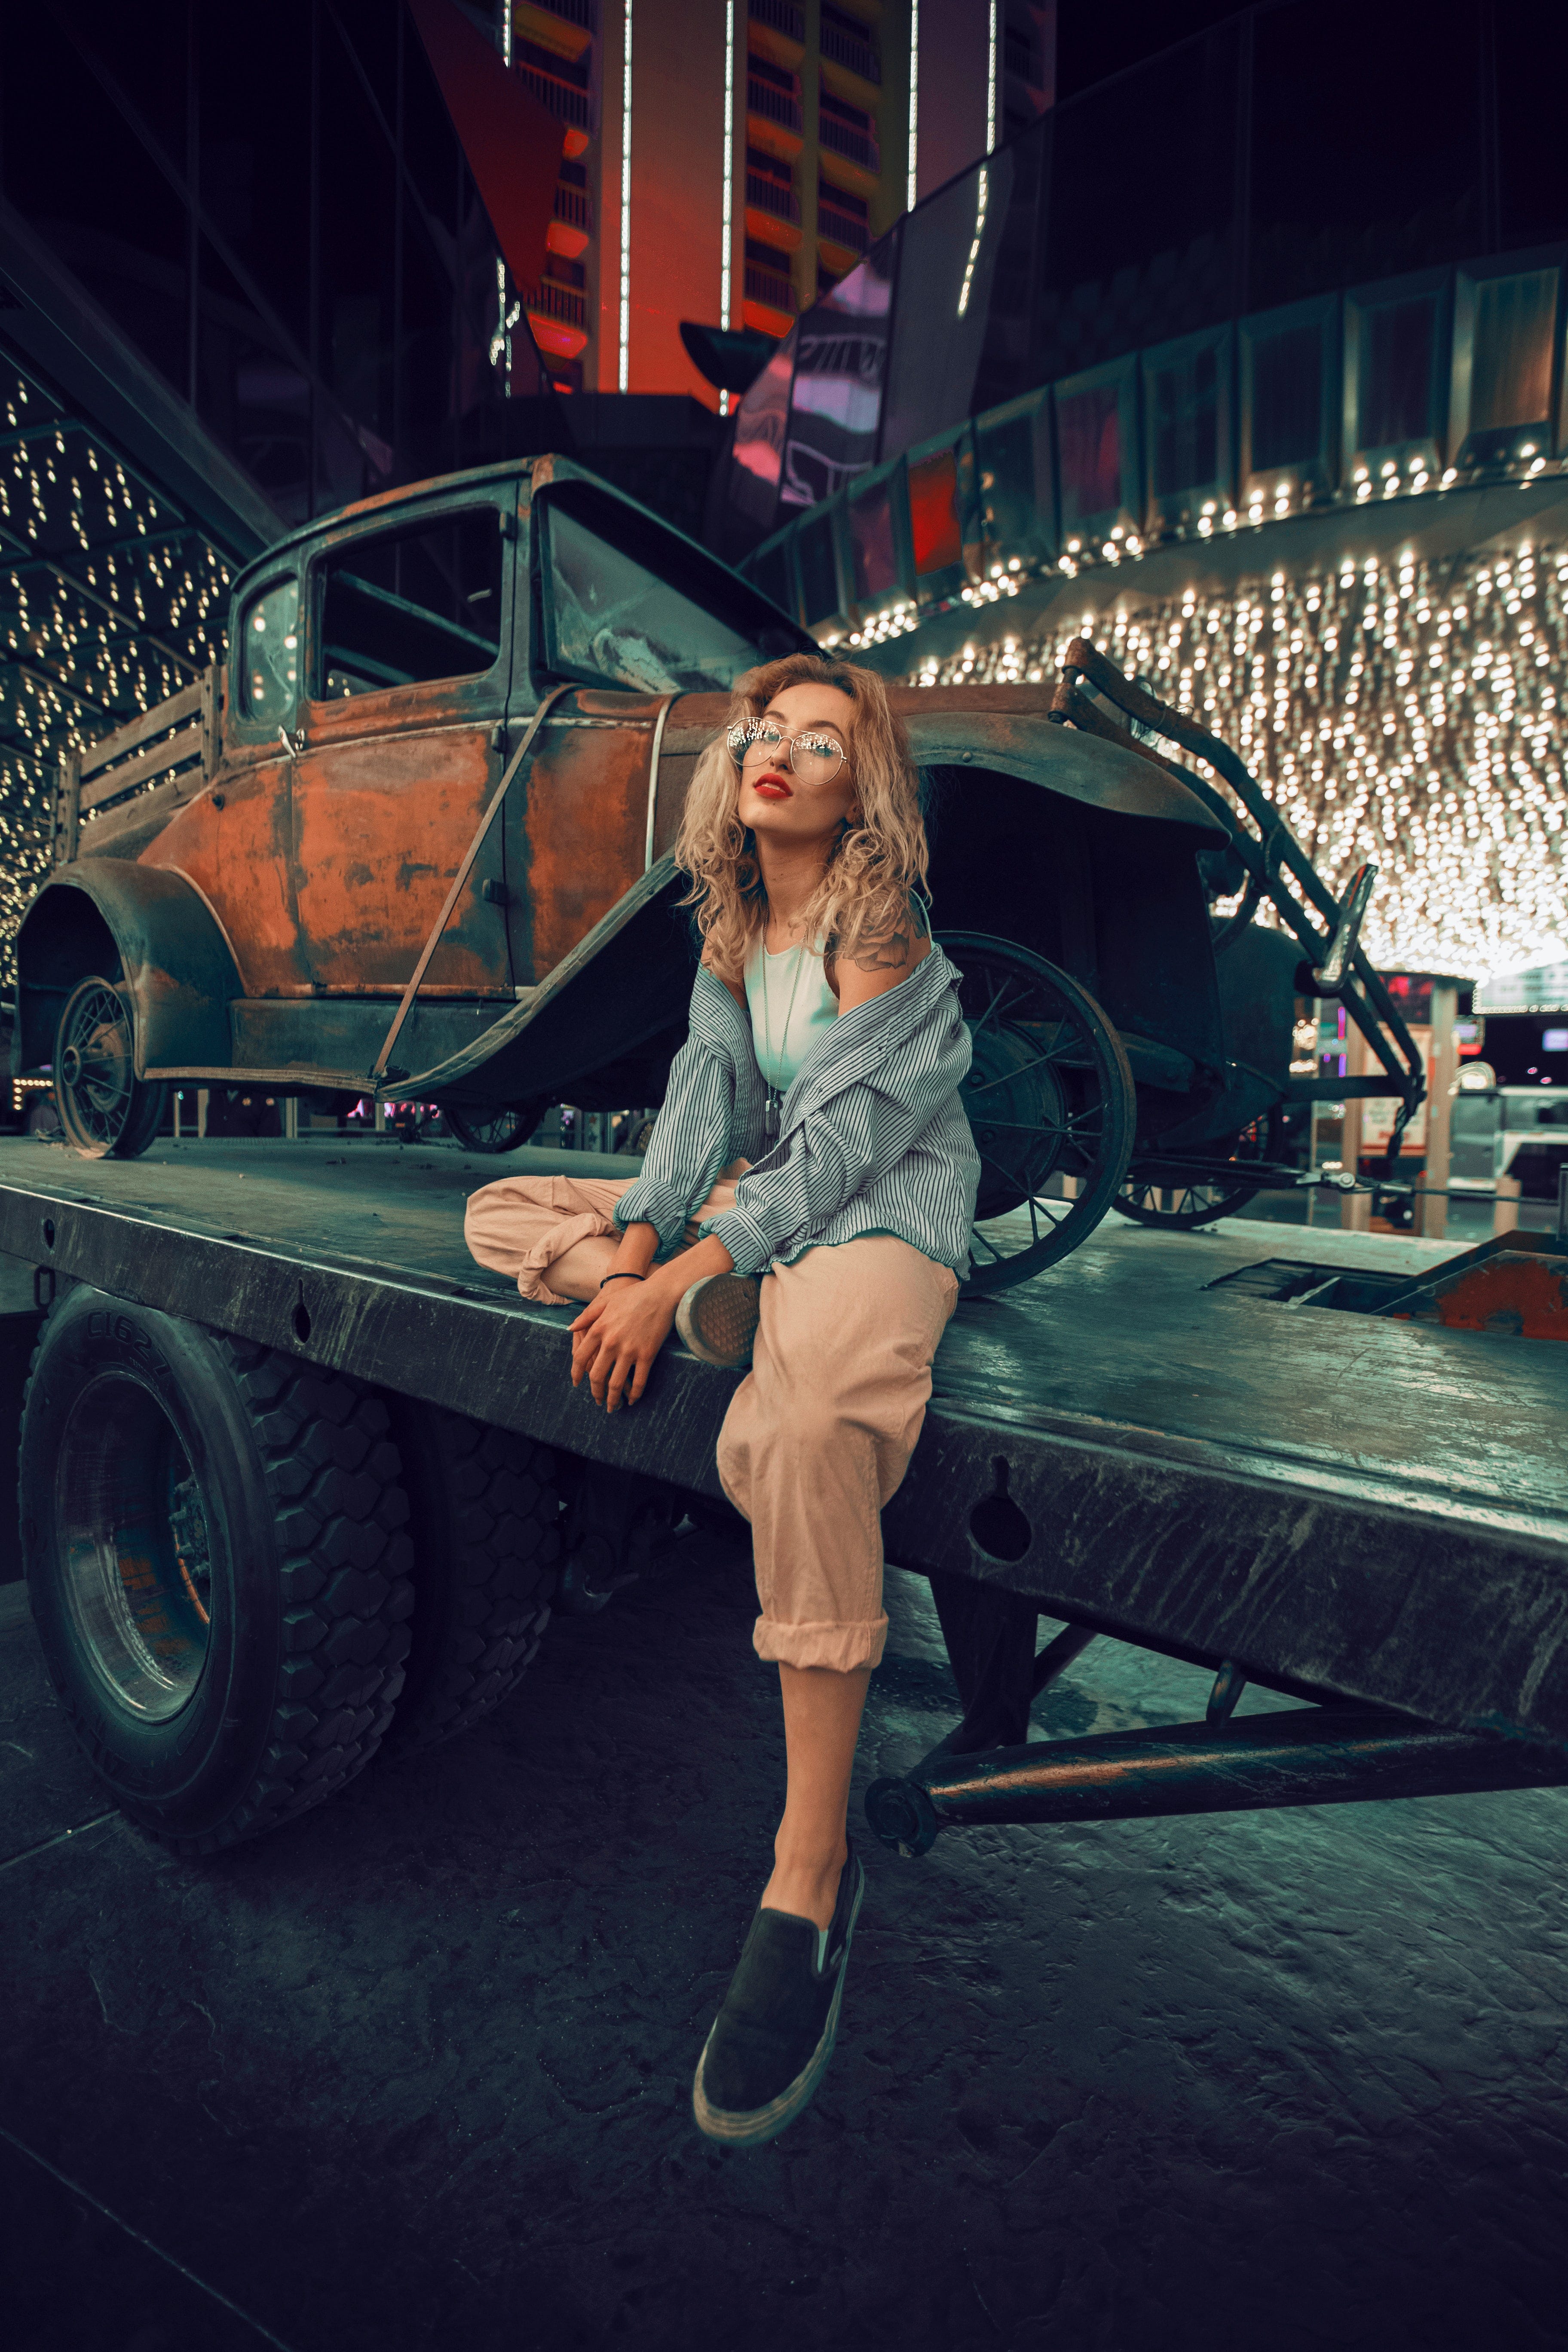 Woman sitting in front of rusty car